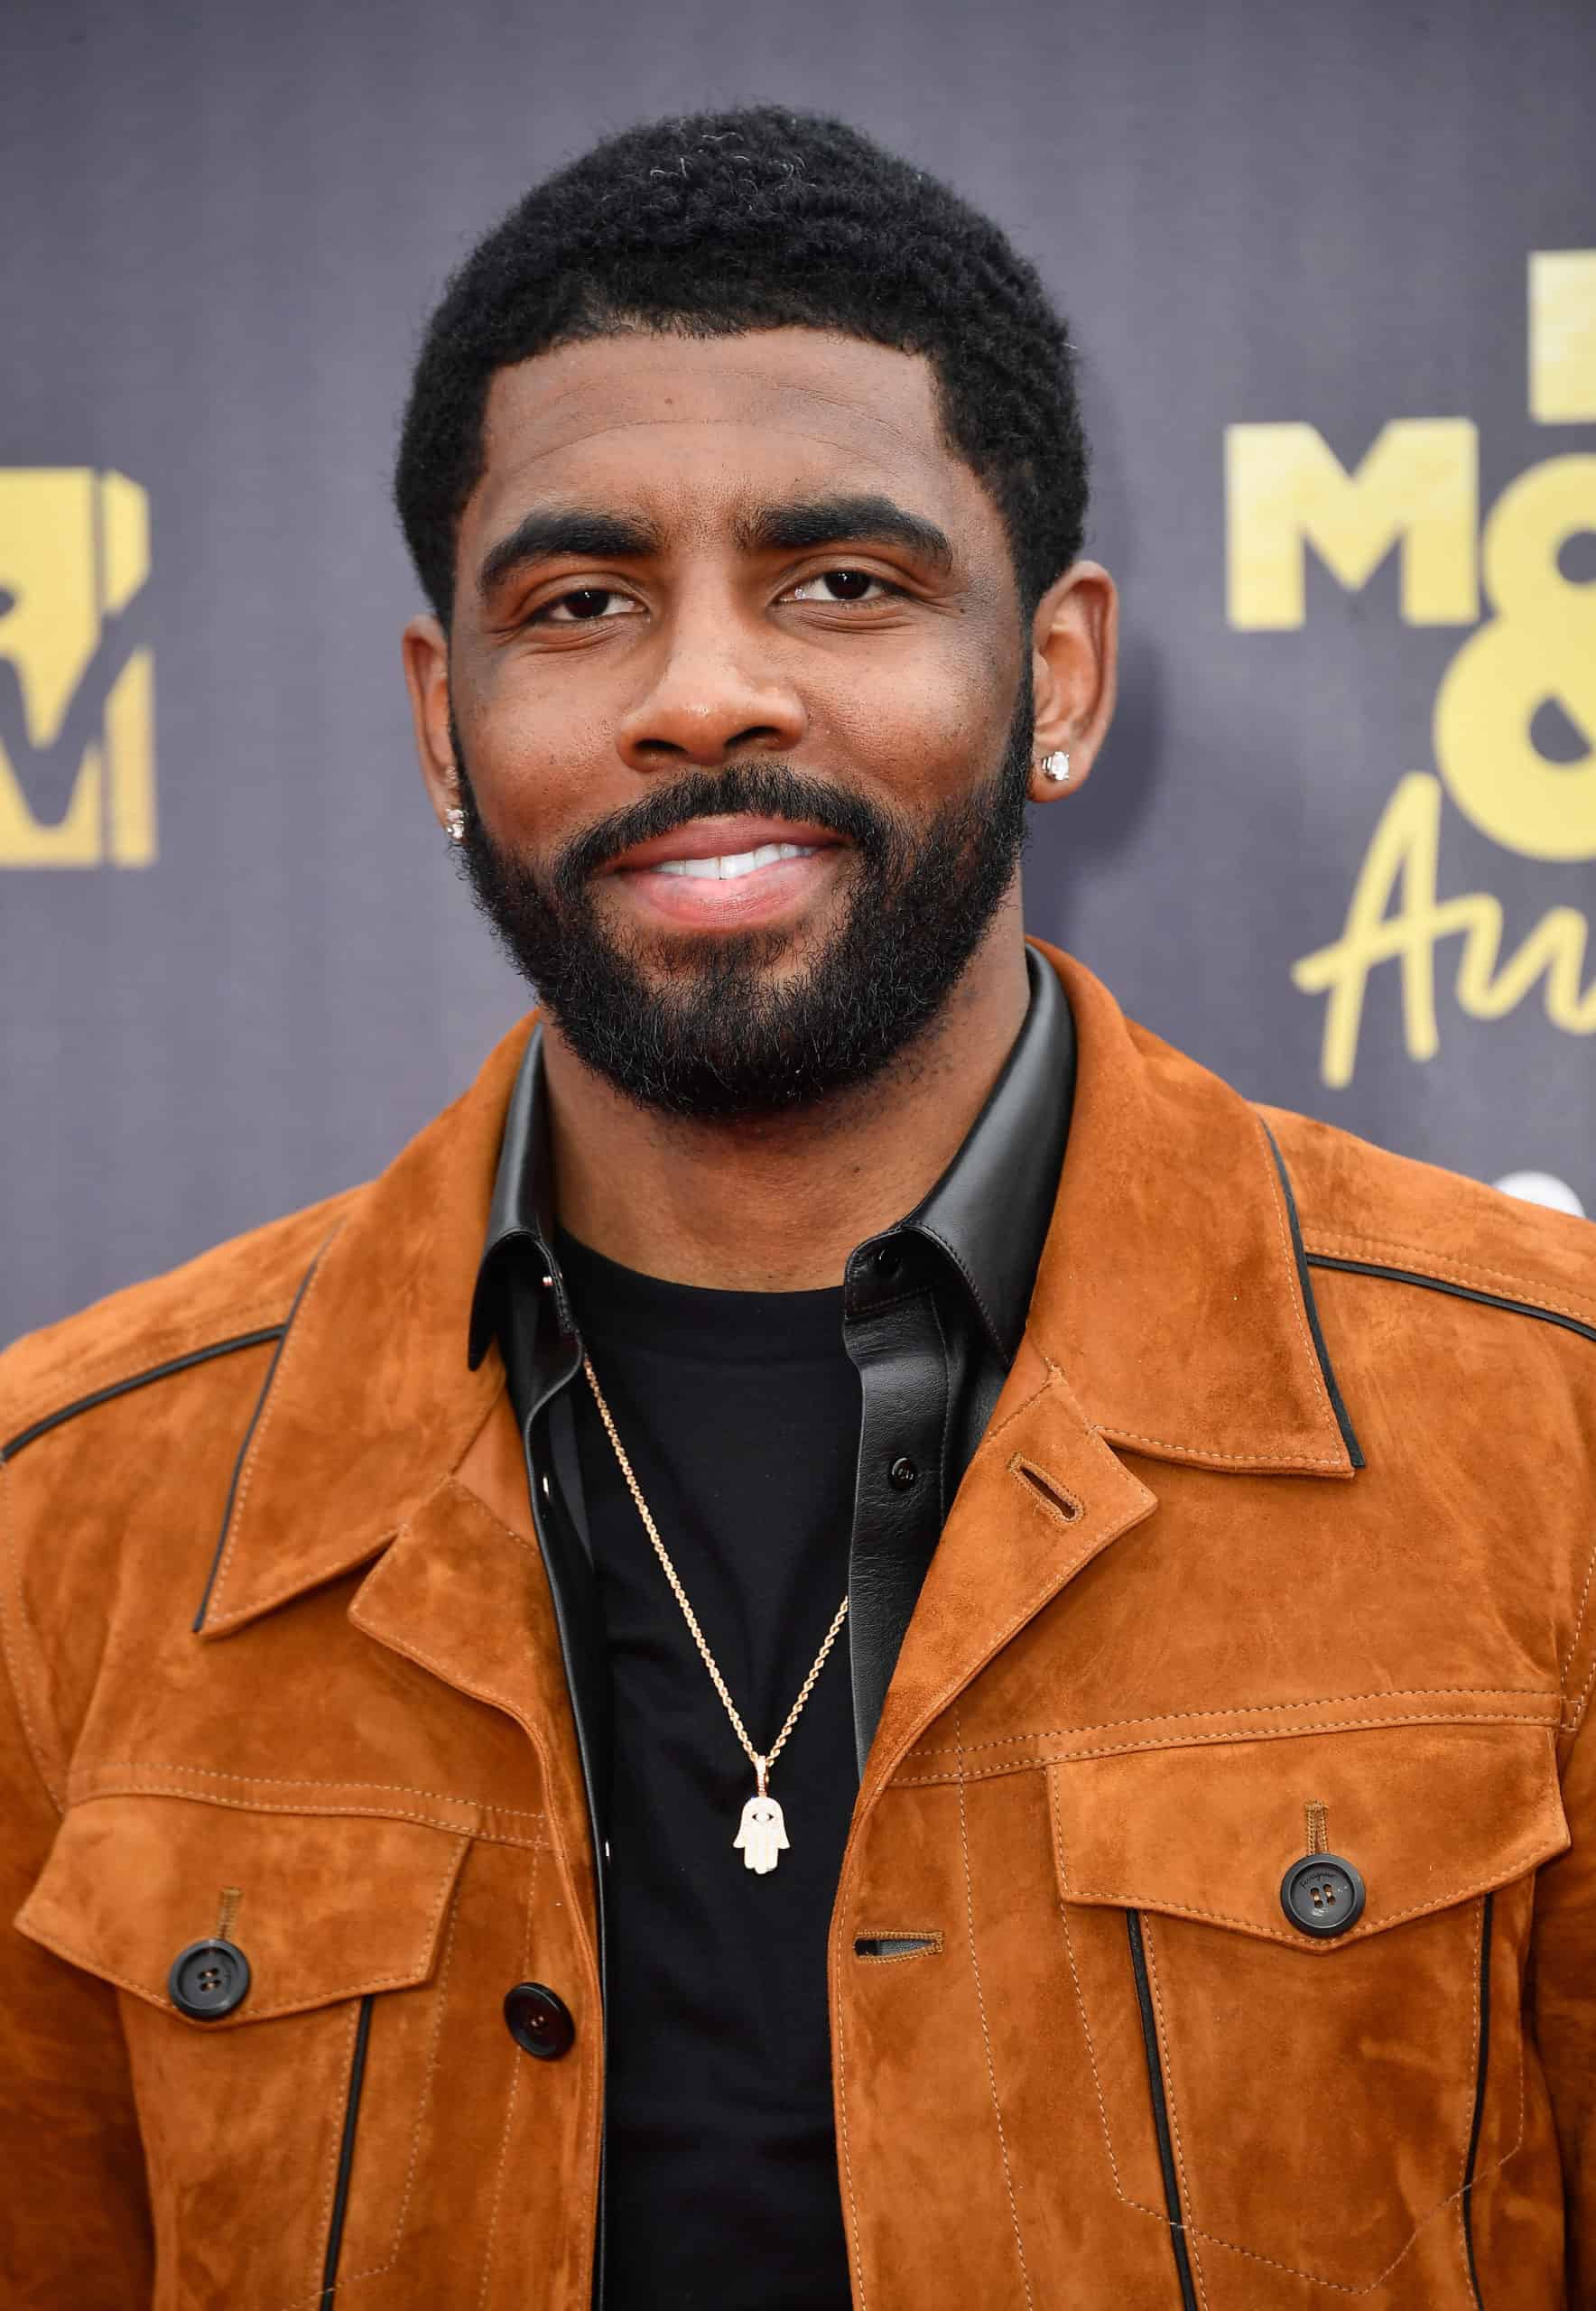 KyrieIrving said his style is like an R&B singer/ skater. I guess